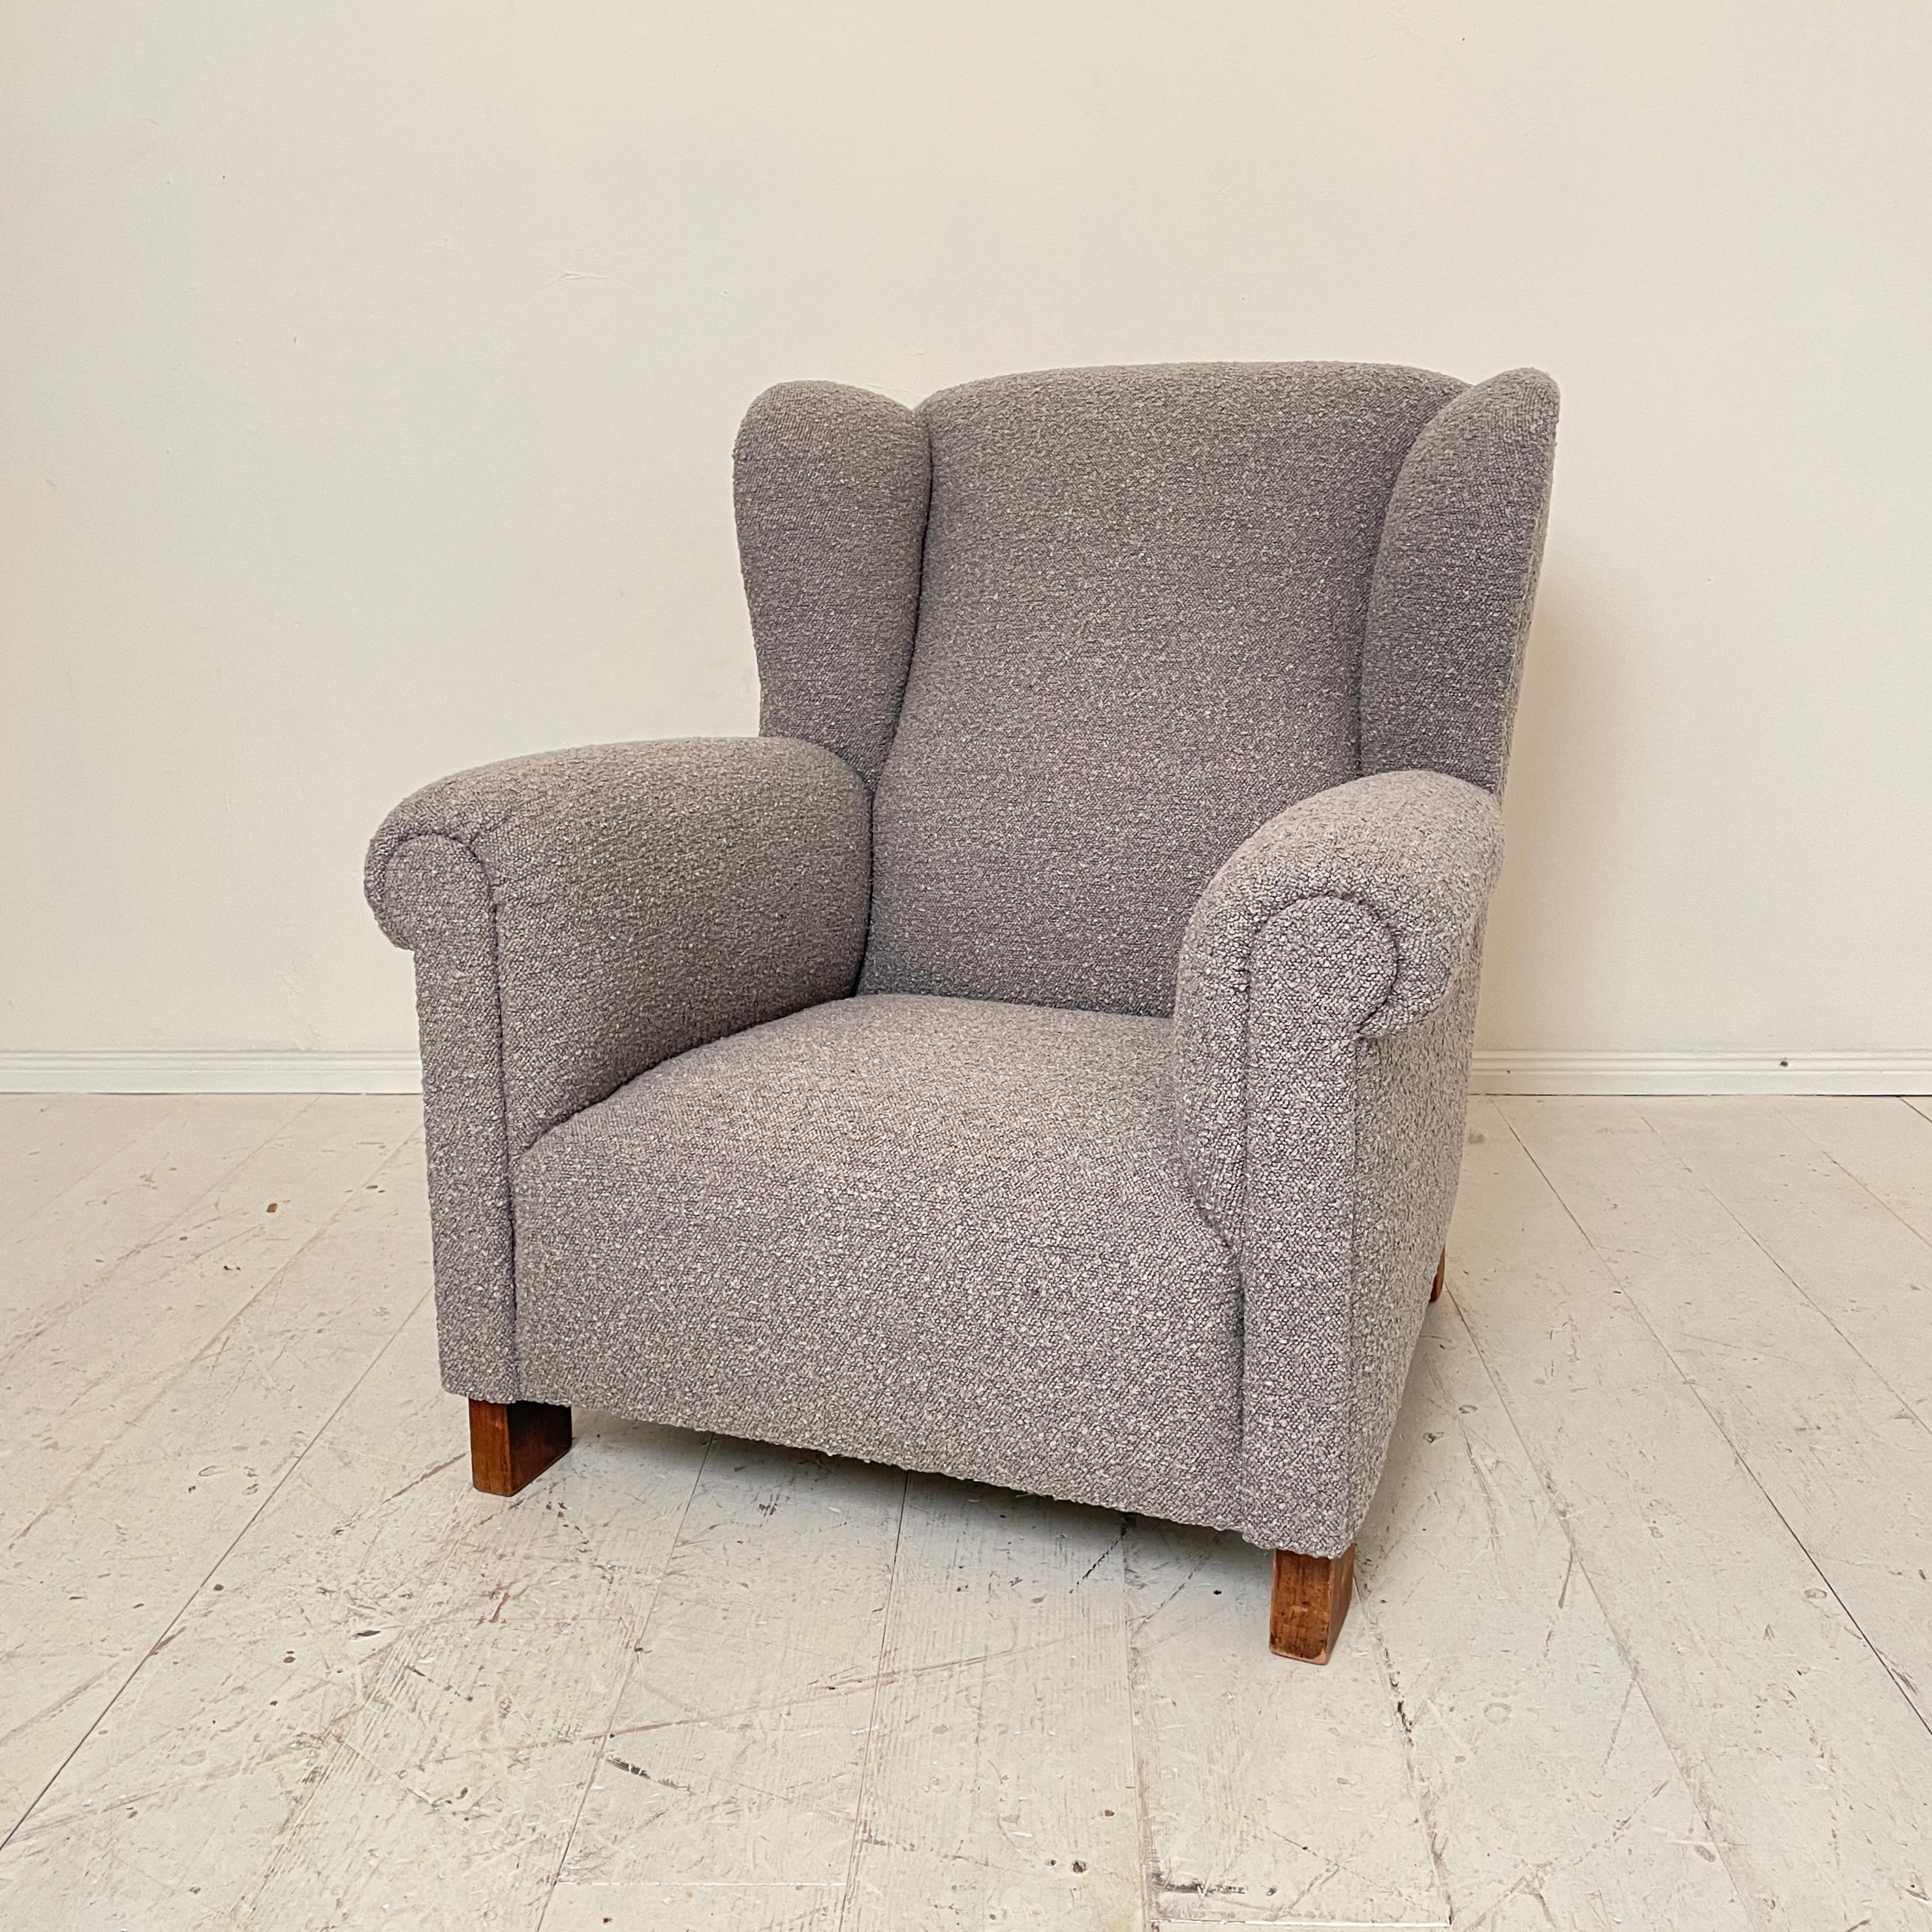 German Art Deco Wingback Chair in Gray Boucle Fabric, 1925 For Sale 9